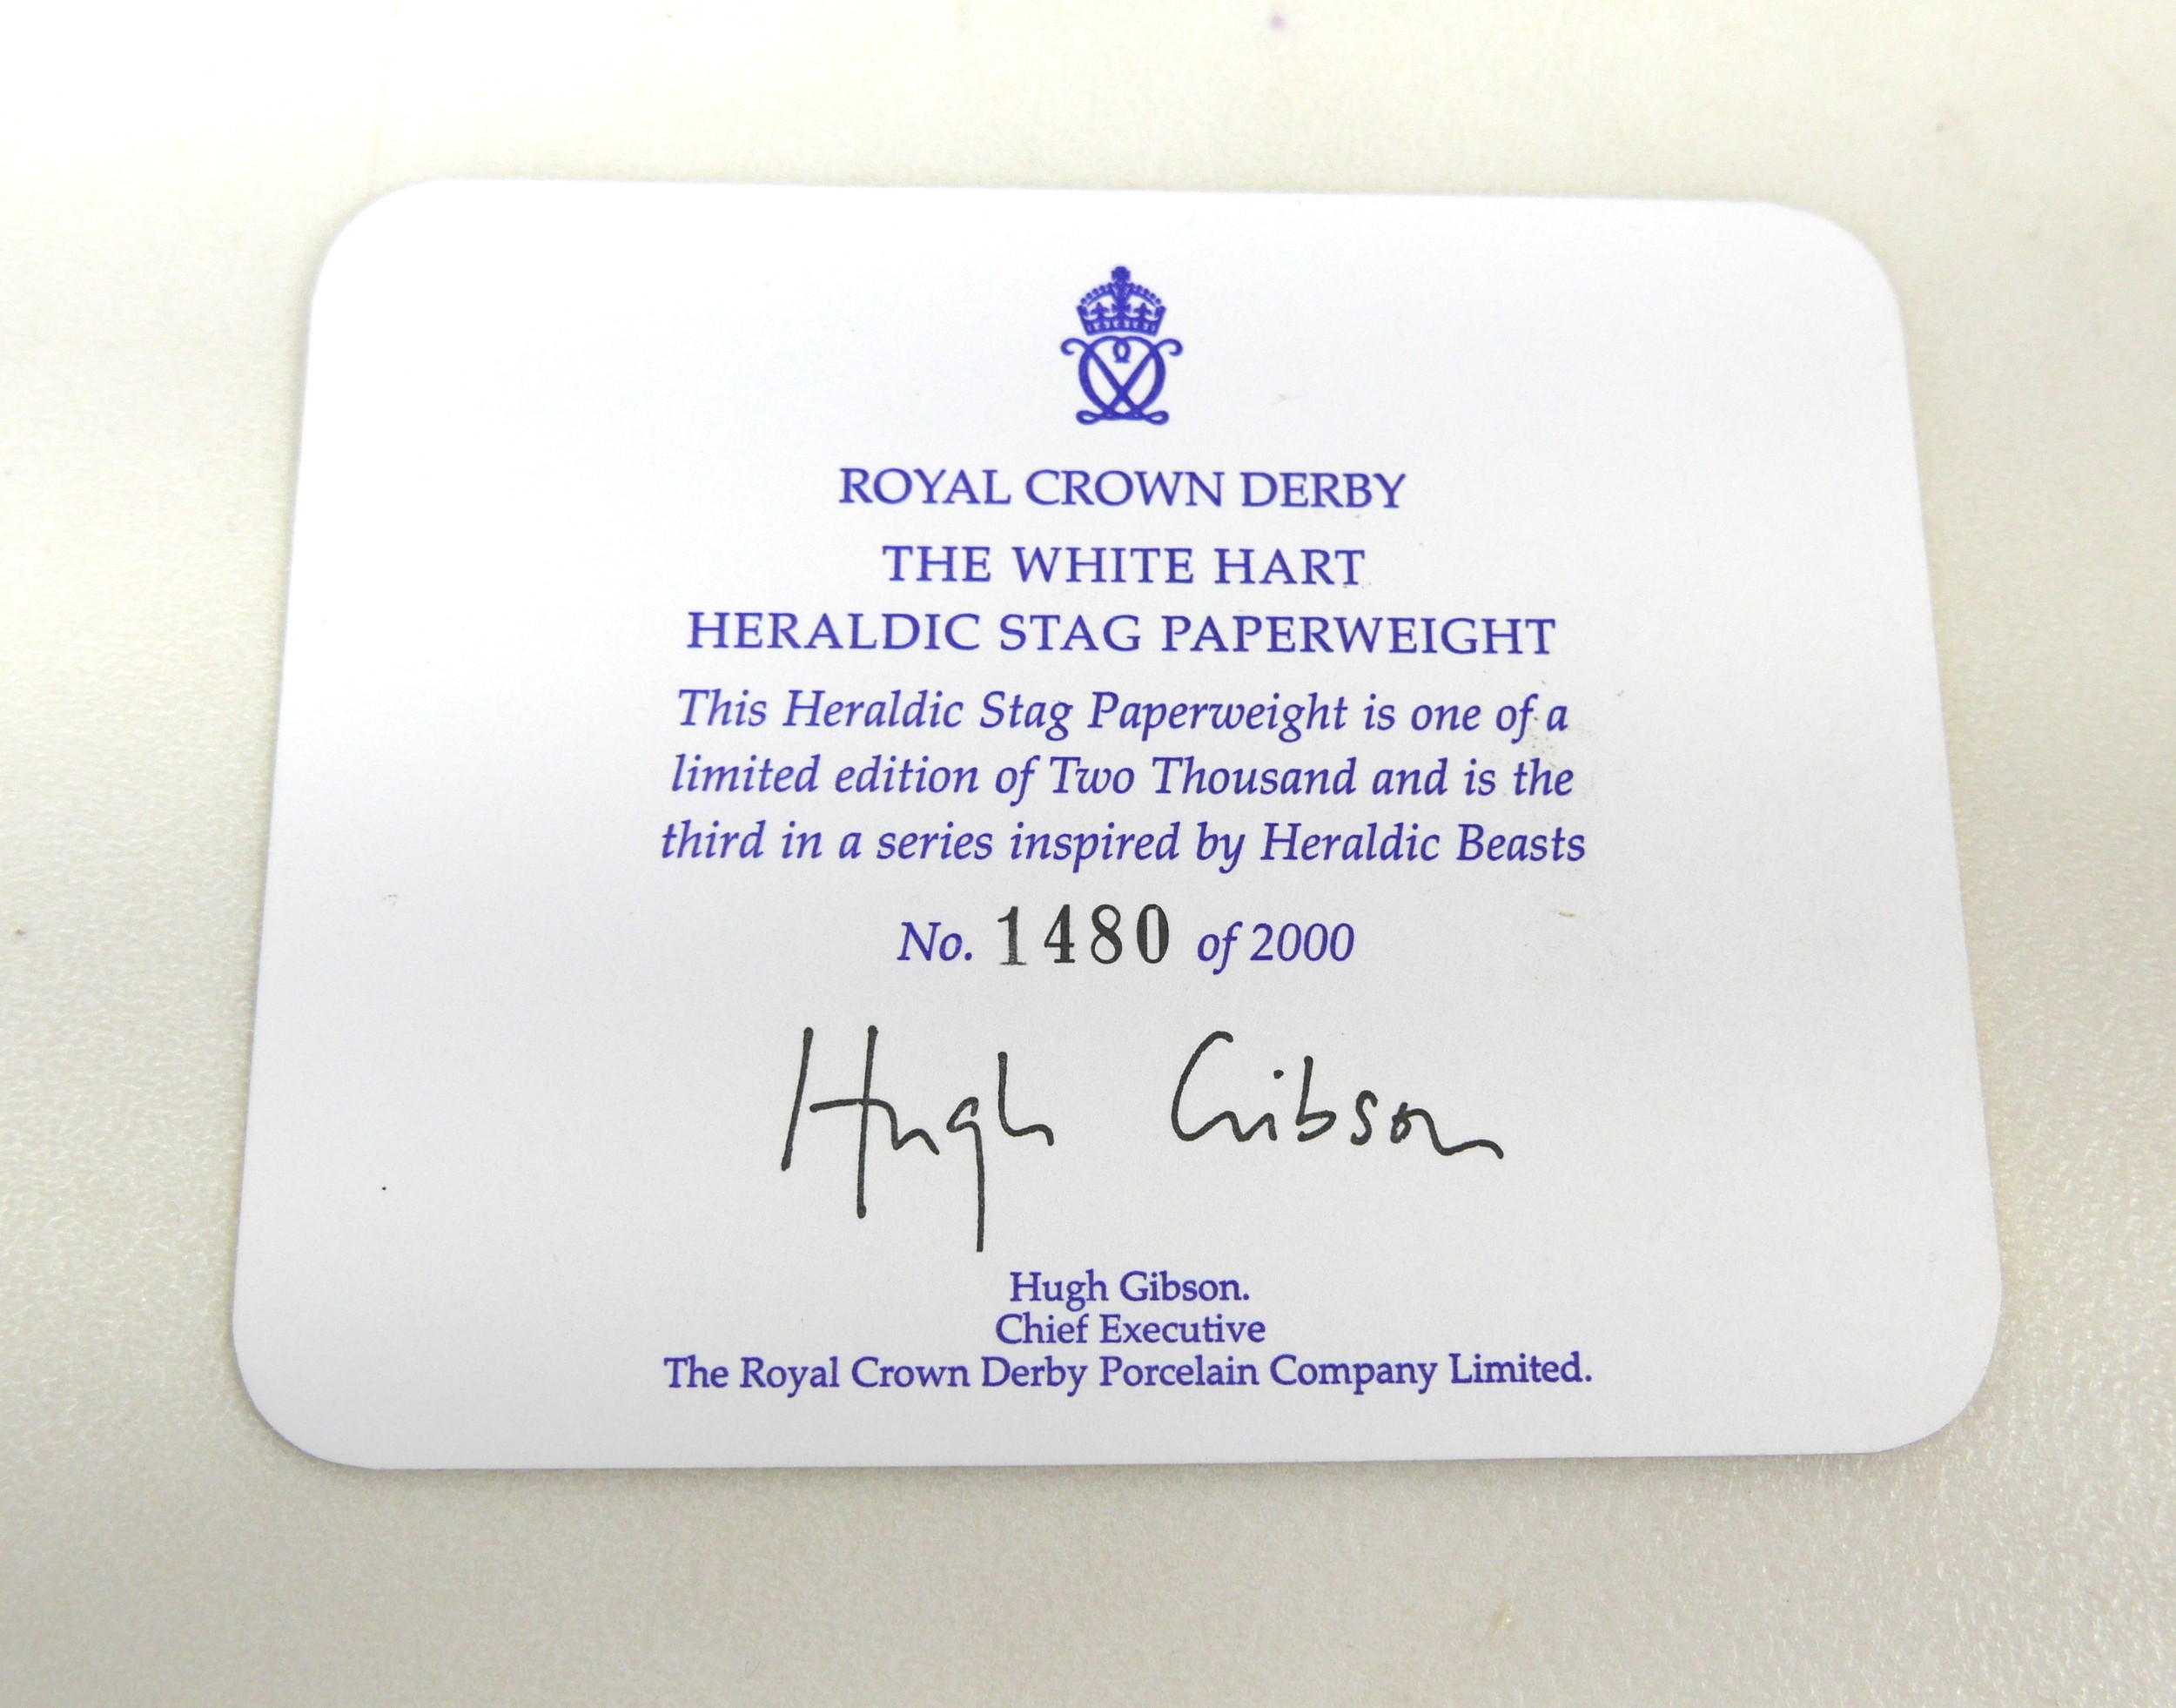 A Royal Crown Derby paperweight, modelled as a limited edition "White Hart", numbered 1480/2000, - Image 11 of 12